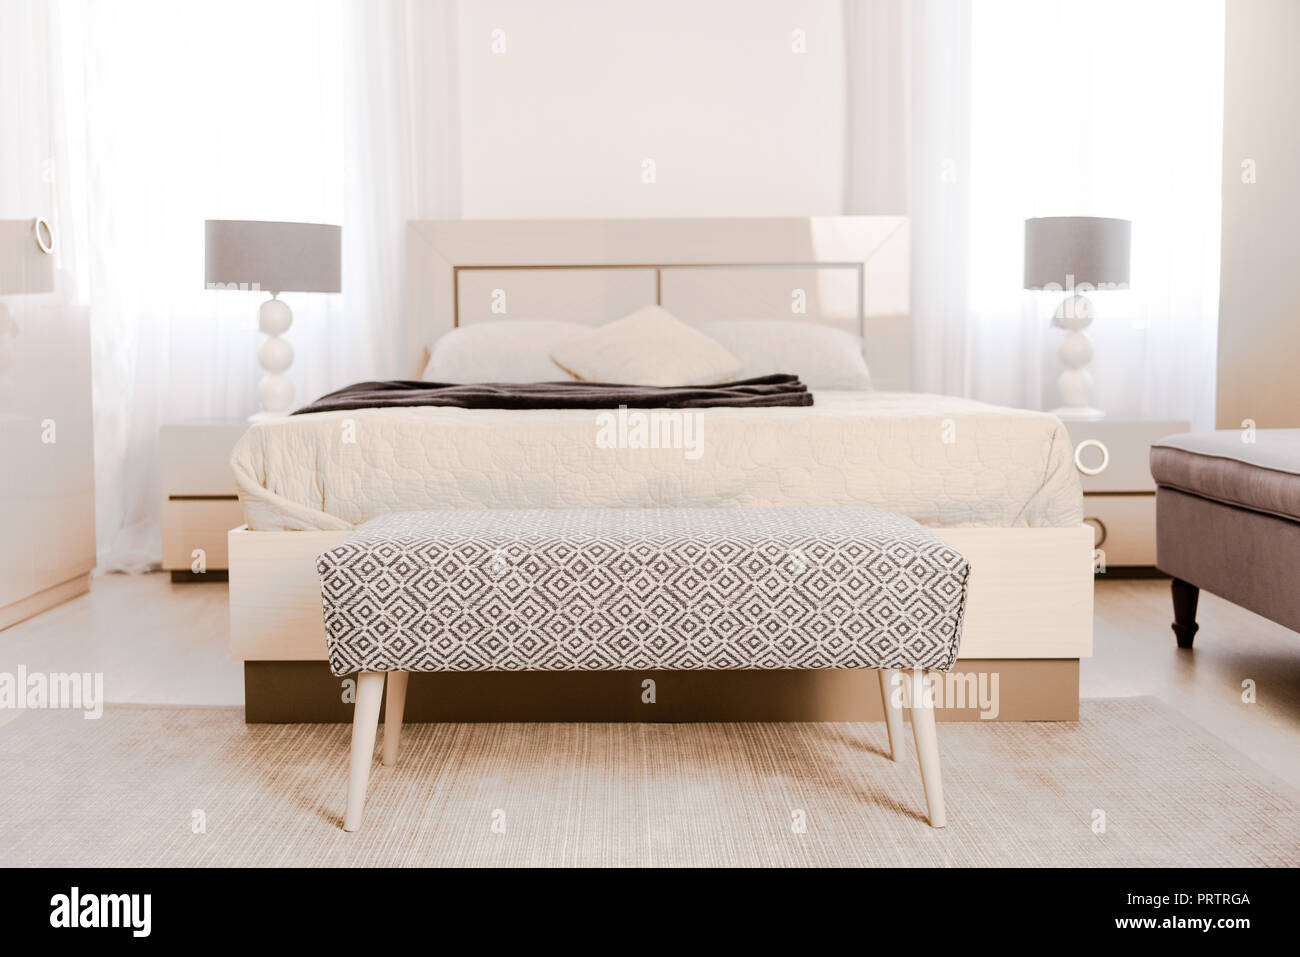 interior of modern light bedroom with soft bed and lamps Stock Photo